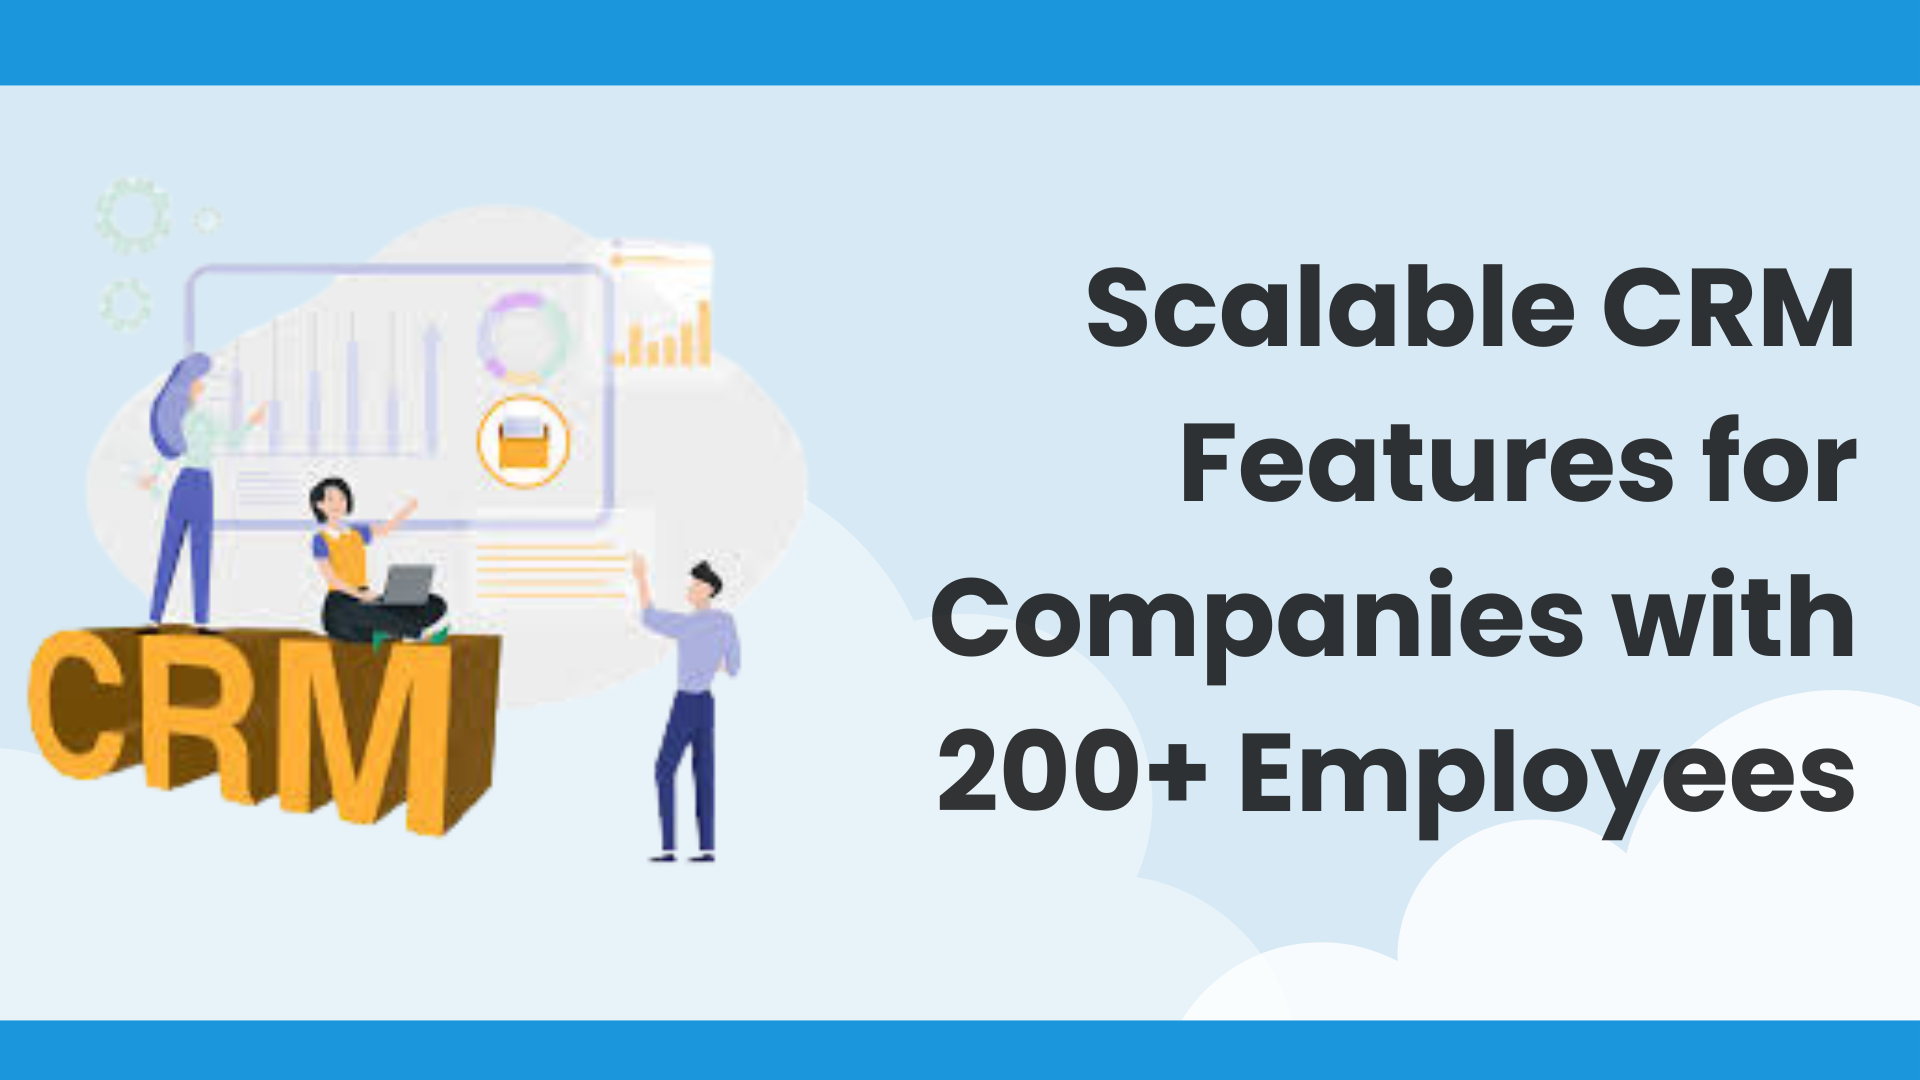 Scalable CRM for Companies 200+